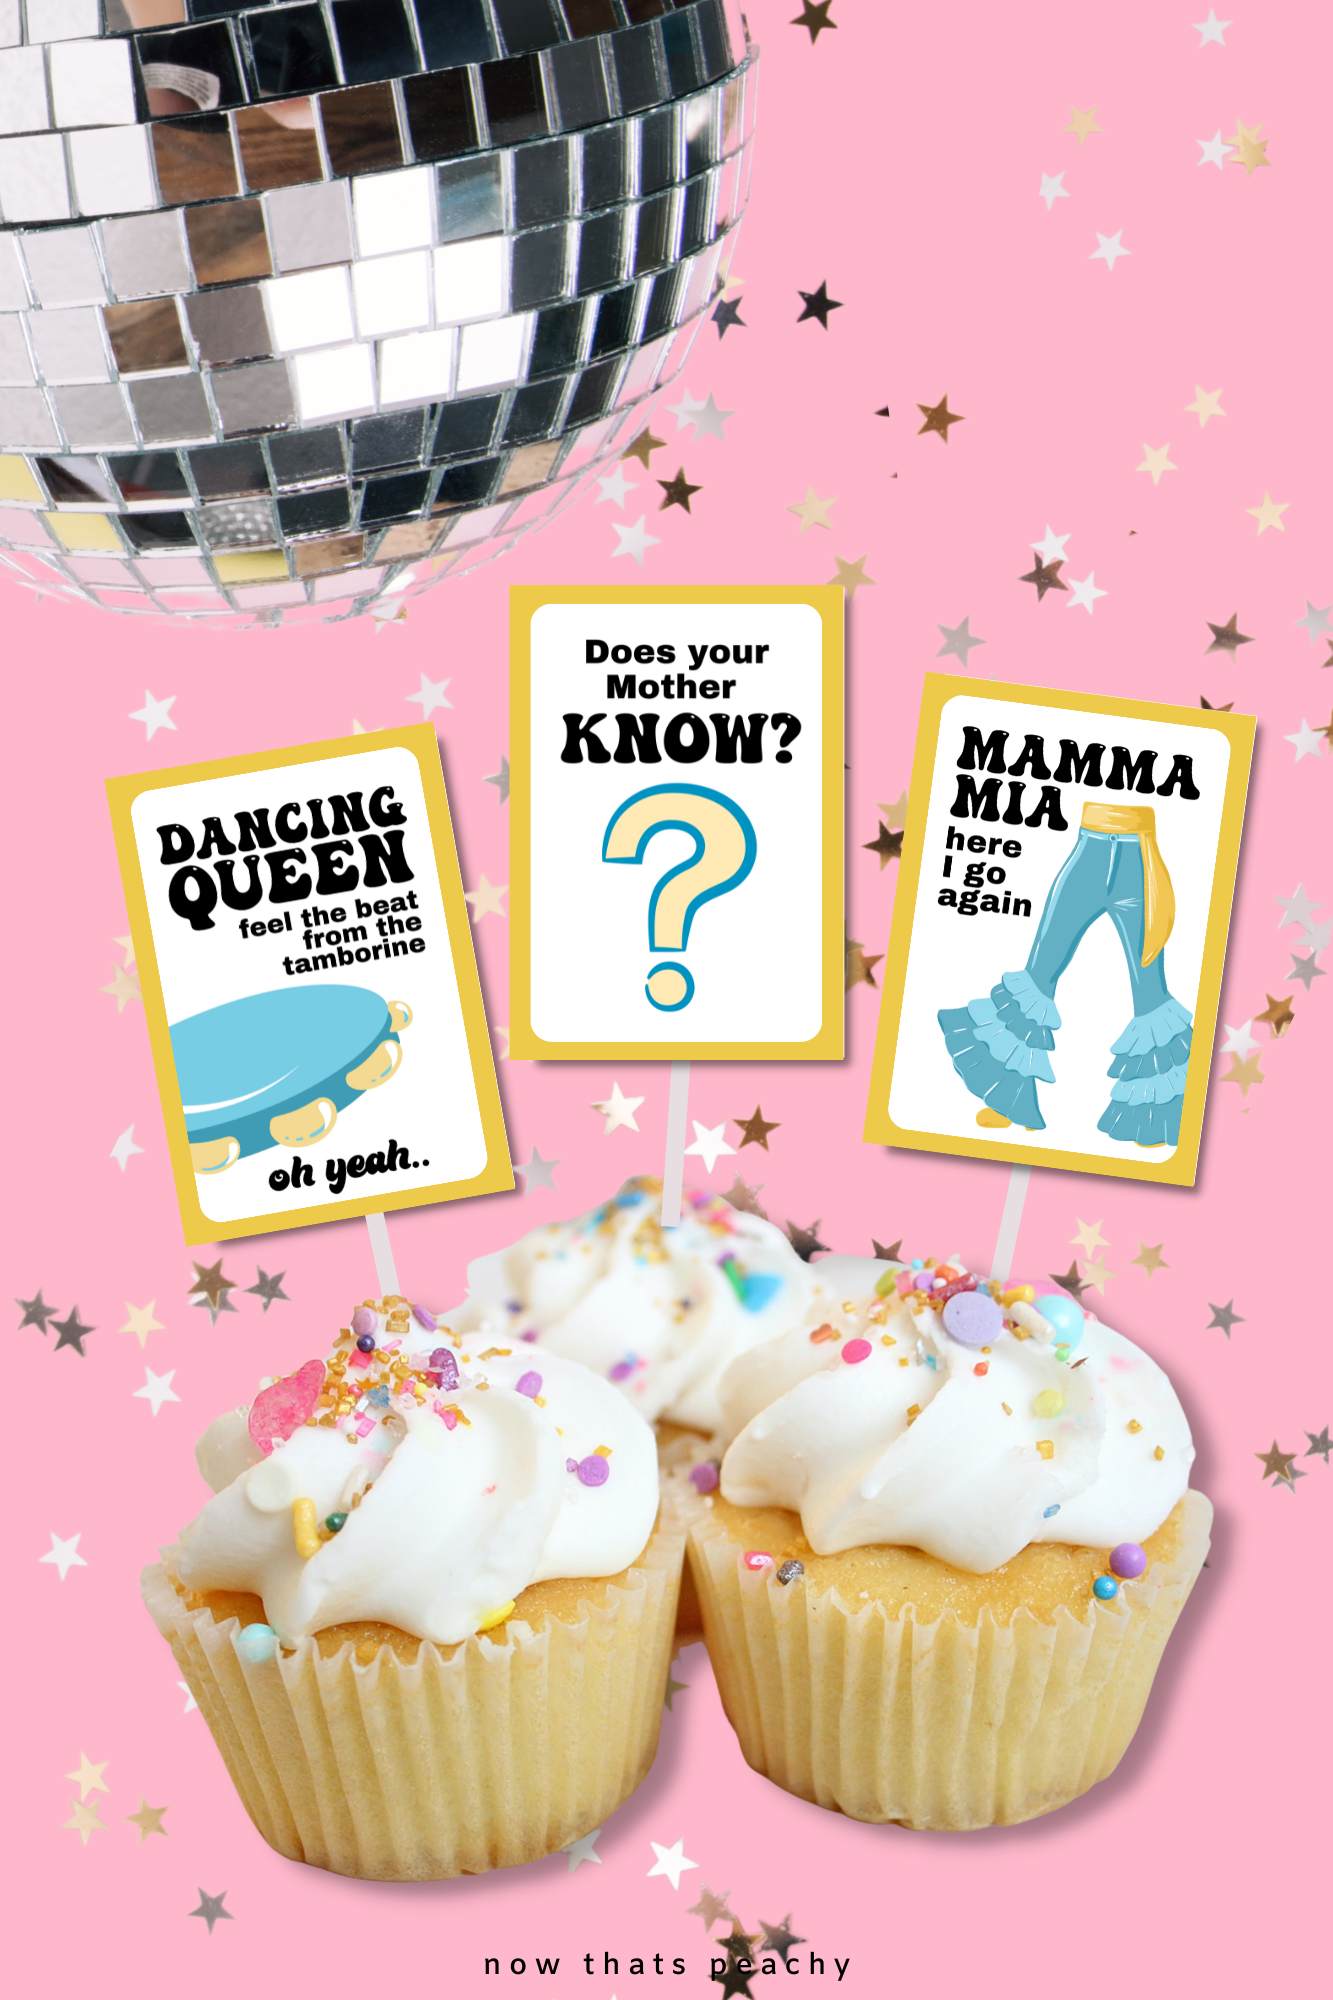 Mamma Mia  party cupcake cake favor sticker decorations decor print outs1970s seventies 70's disco ball karaoke  printable template digital instant download edit Donna and the dynamos DIY custom musical movie design hand drawn fan art modern color themed bachelorette birthday charity fundraiser event fun 